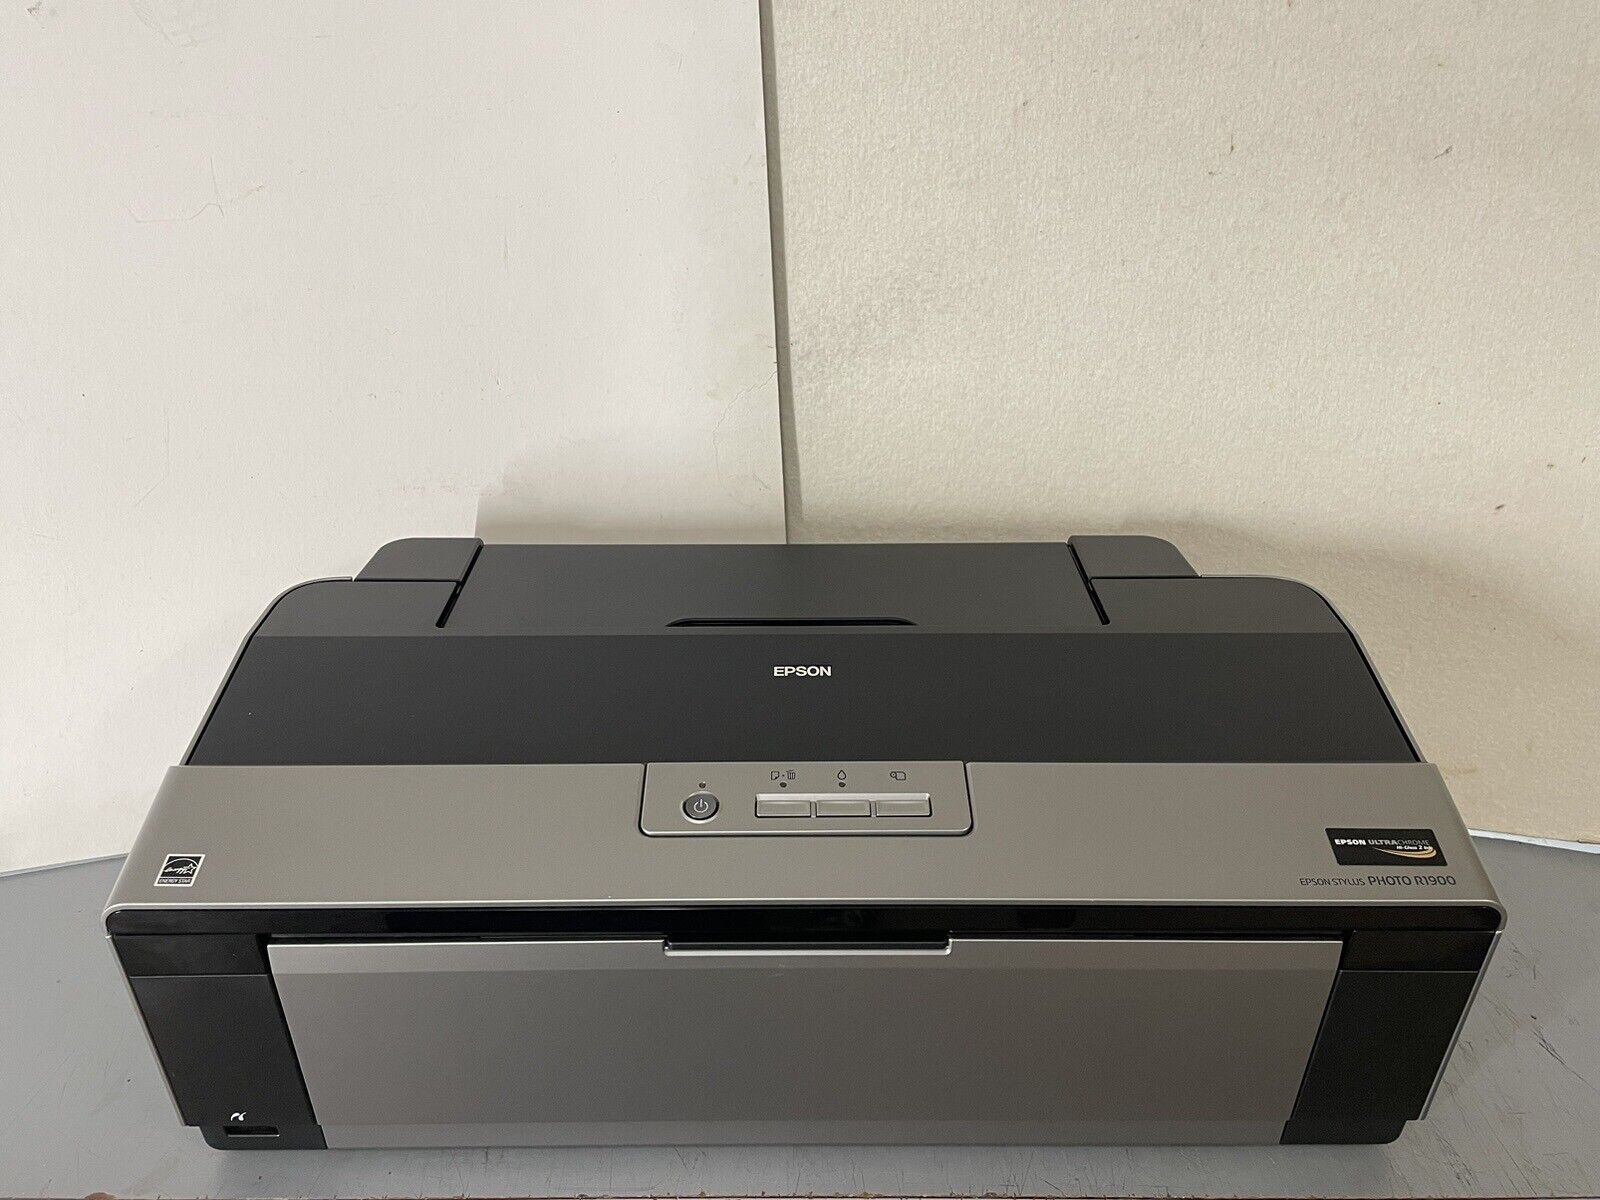 Epson Stylus Photo R1900 Digital Photo Inkjet Printer Untested Sold for Parts